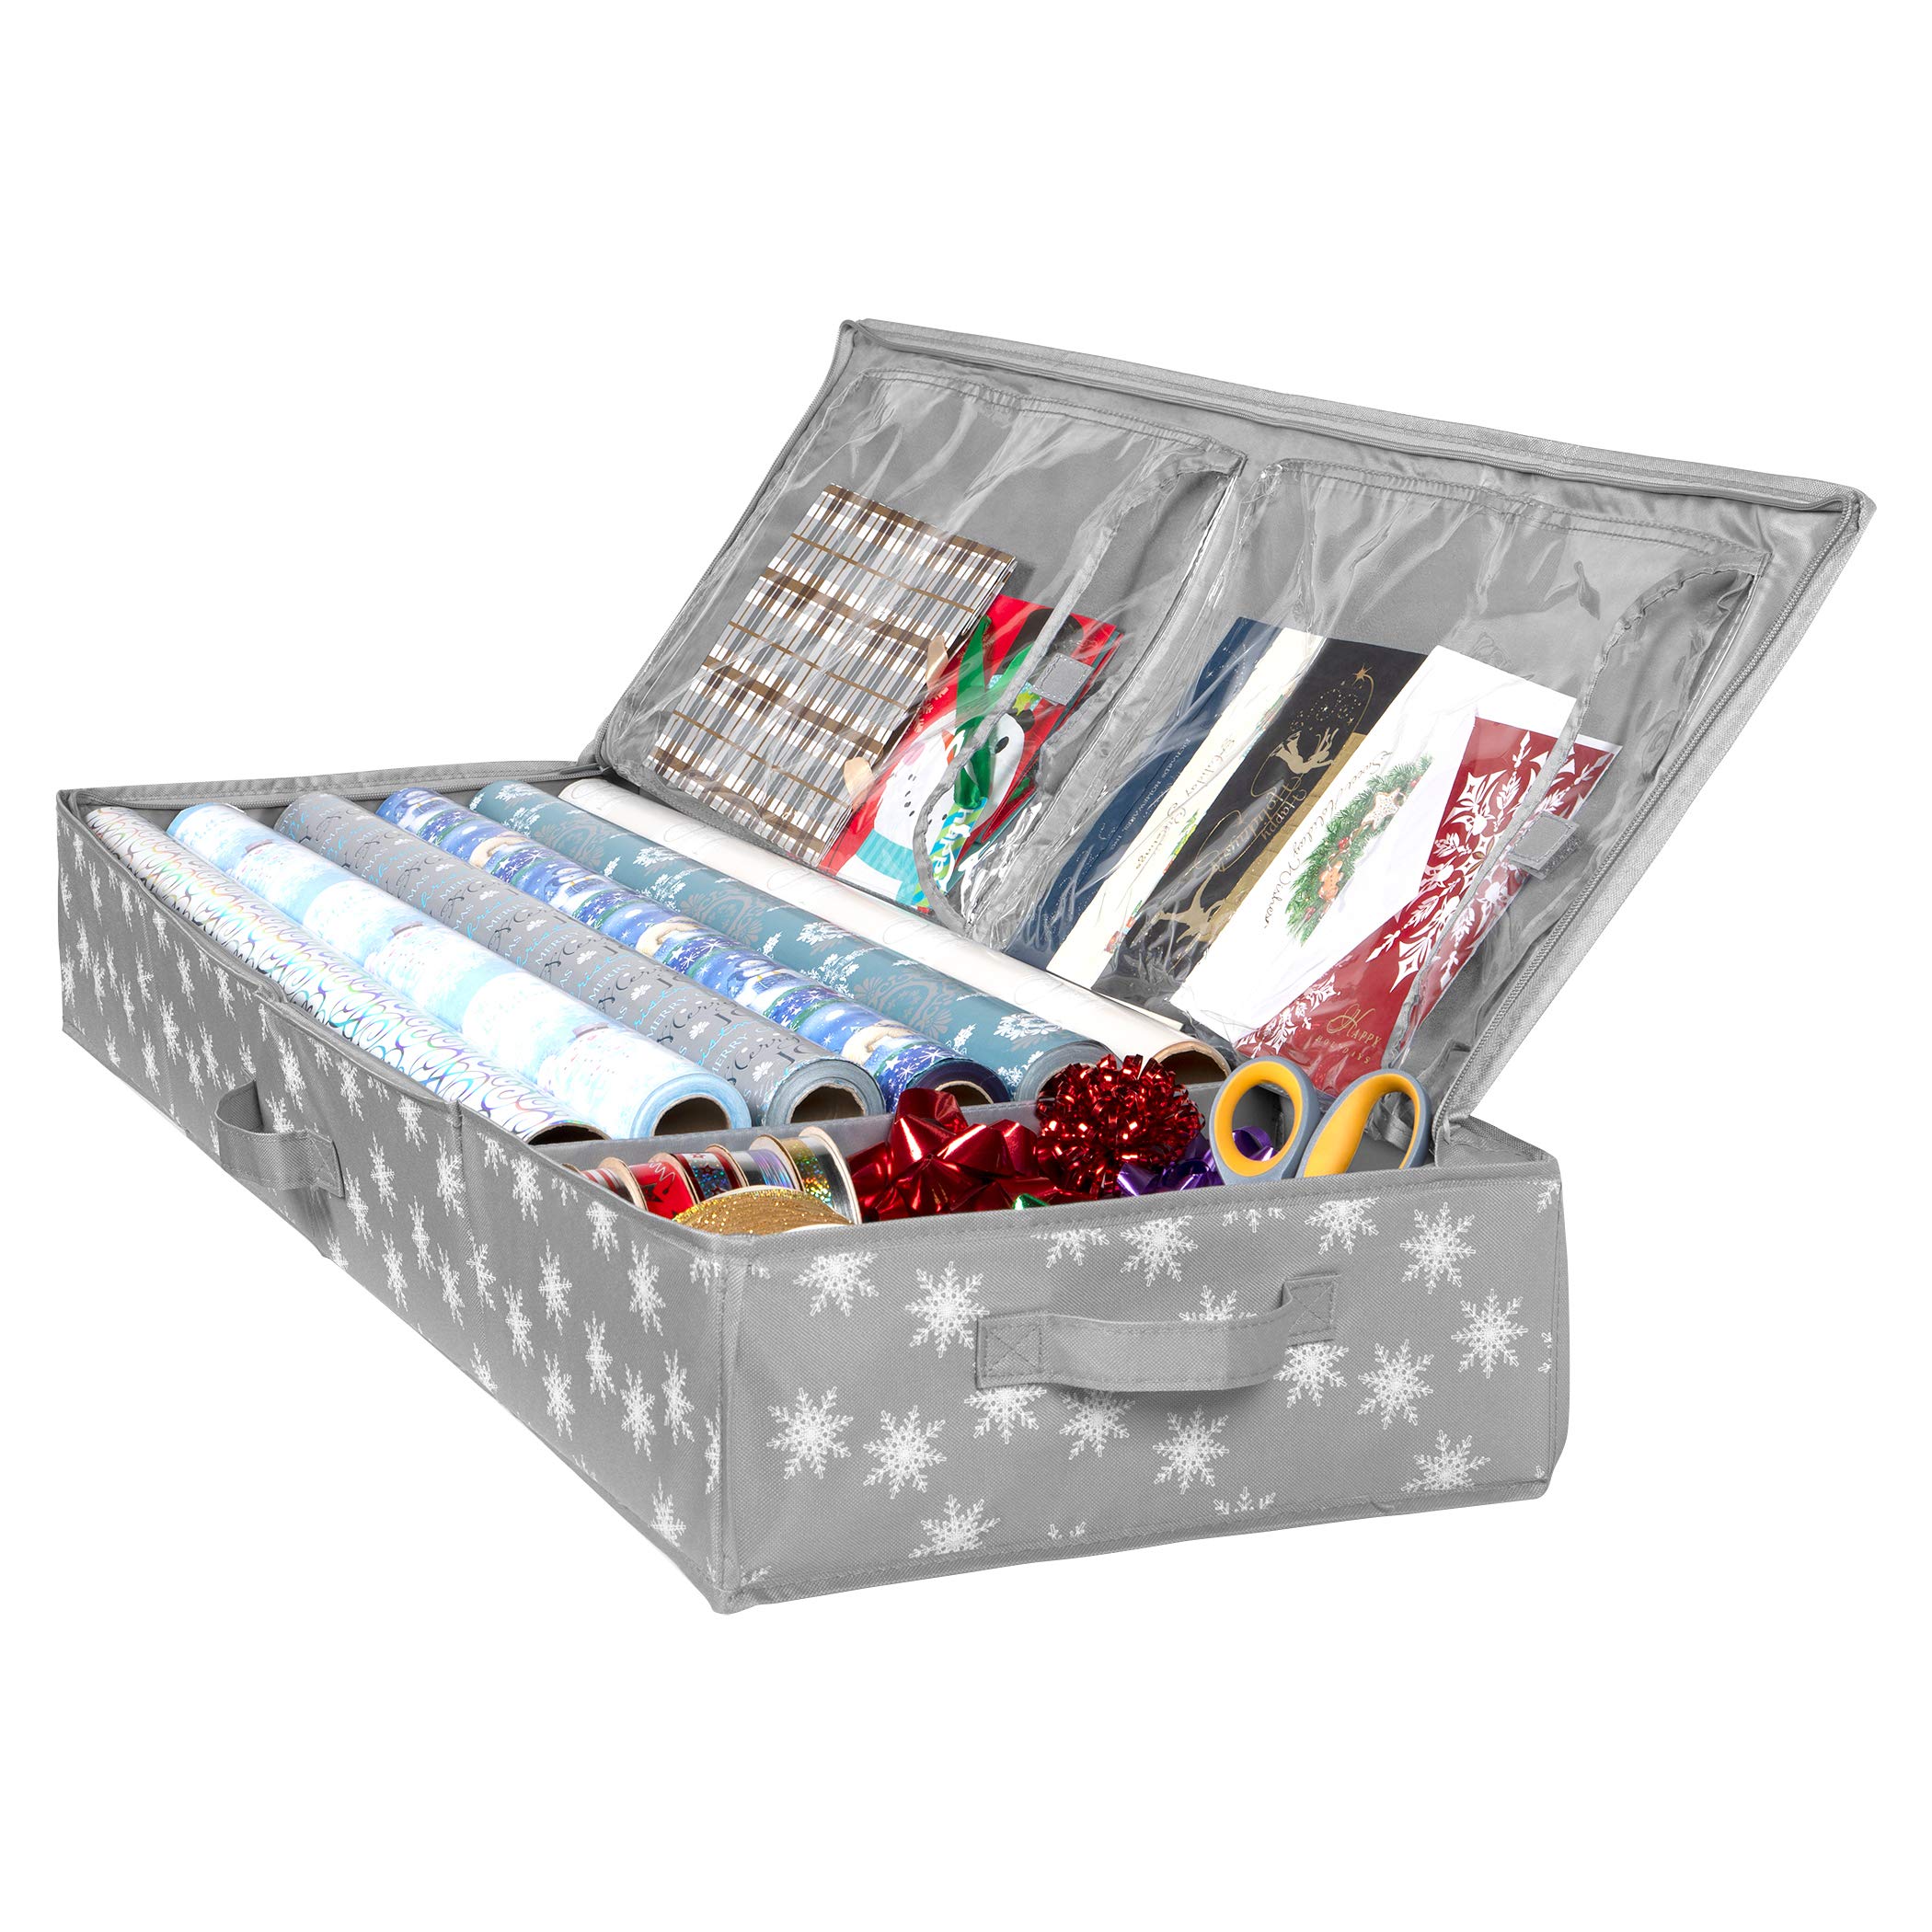 Wrapping Paper Storage Container – Fits up to 27 Rolls 1 3/8” Diam. - Underbed Gift Wrap Organizer Bags, Wrapping Paper Rolls, Ribbon, and Bows - Under Bed- Durable Material 600D - Up to 40